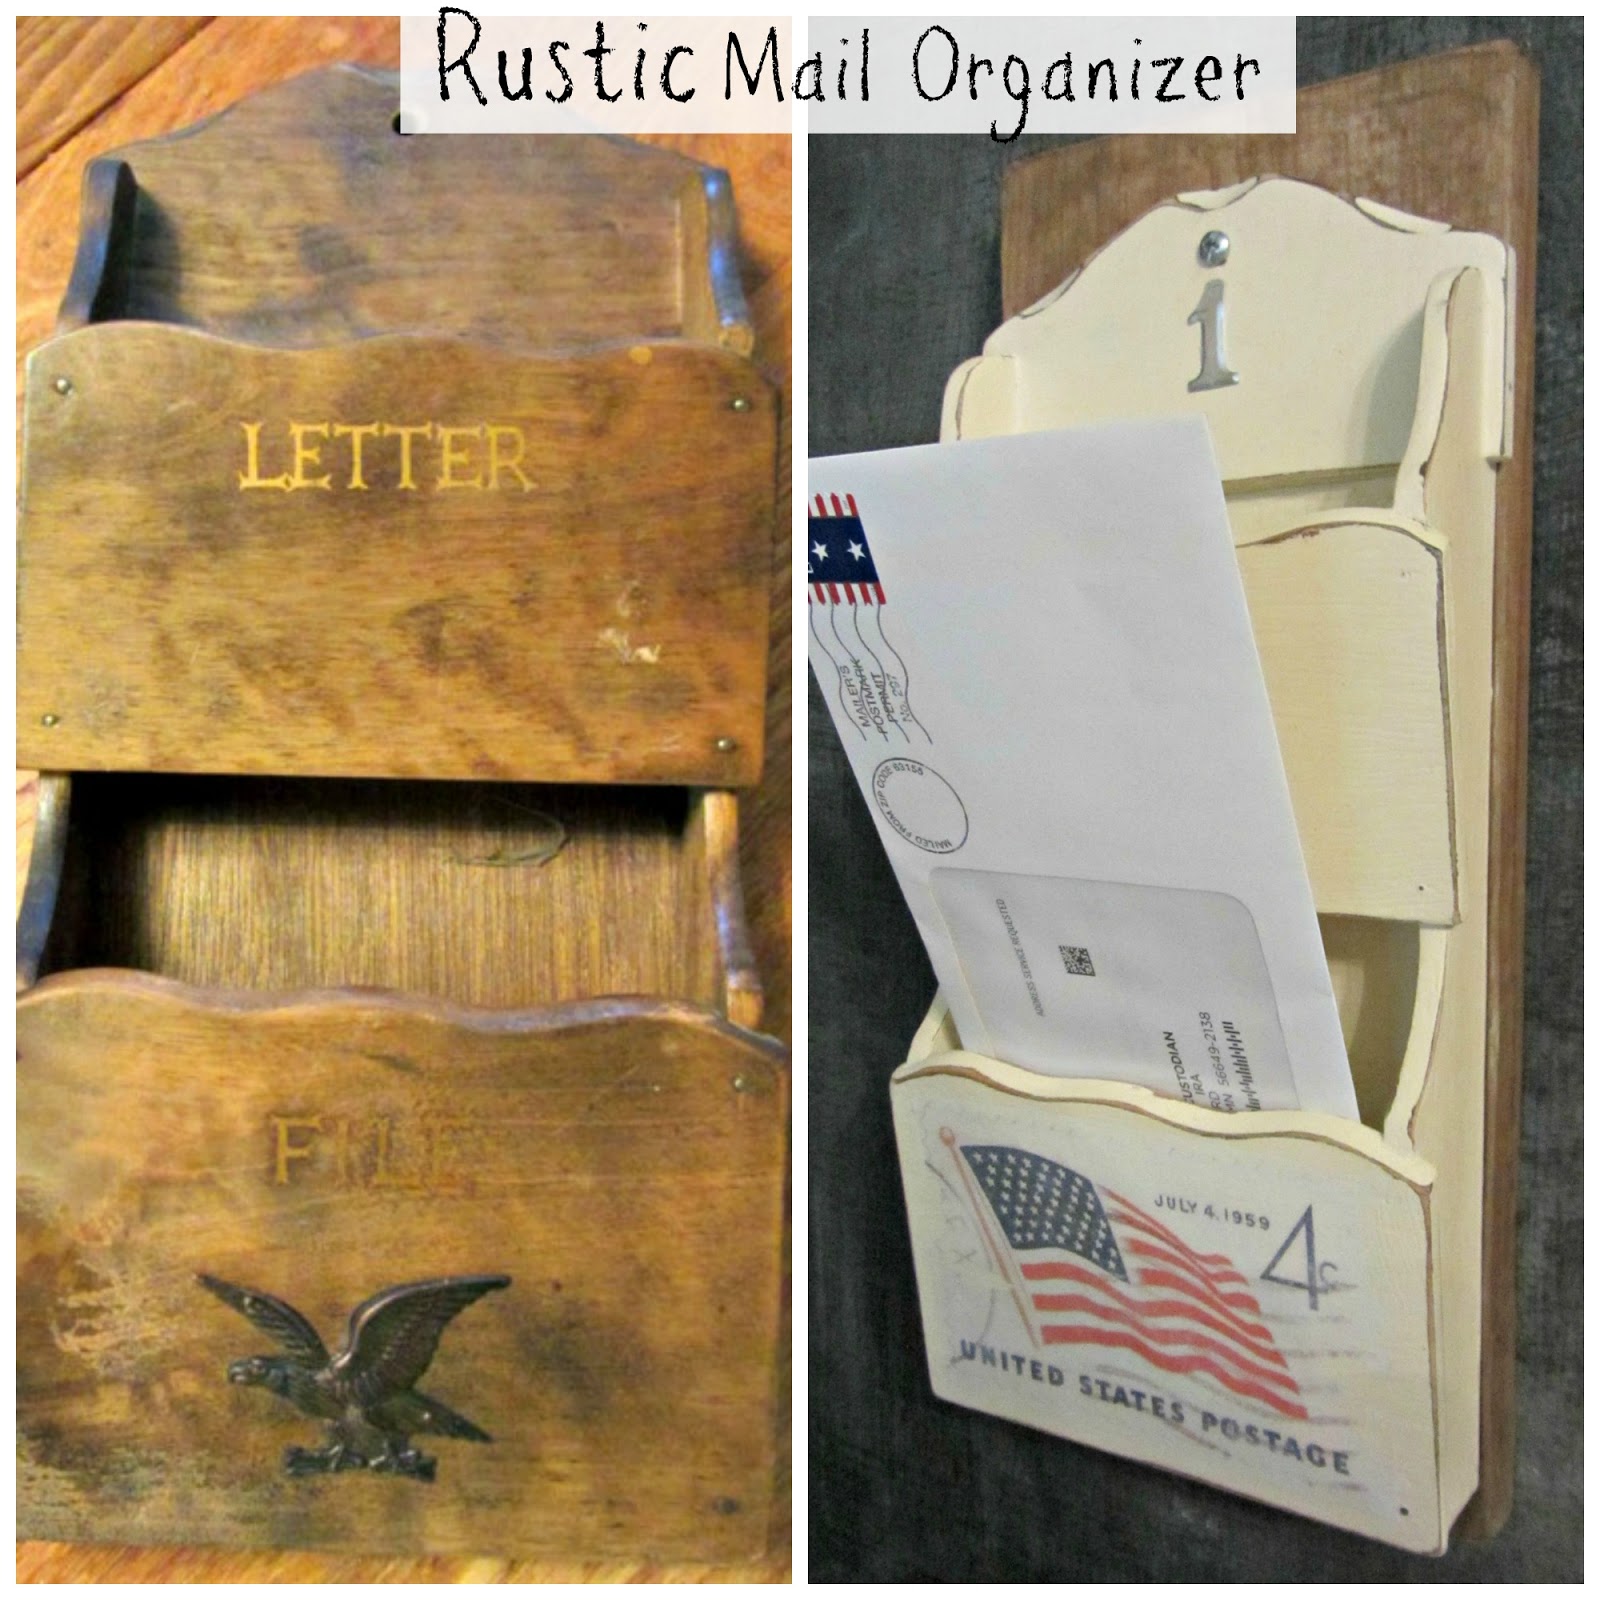 Rustic Up-Cycle of Thrift Shop Mail Organizers www.organizeclutterqueen.blogspot.com